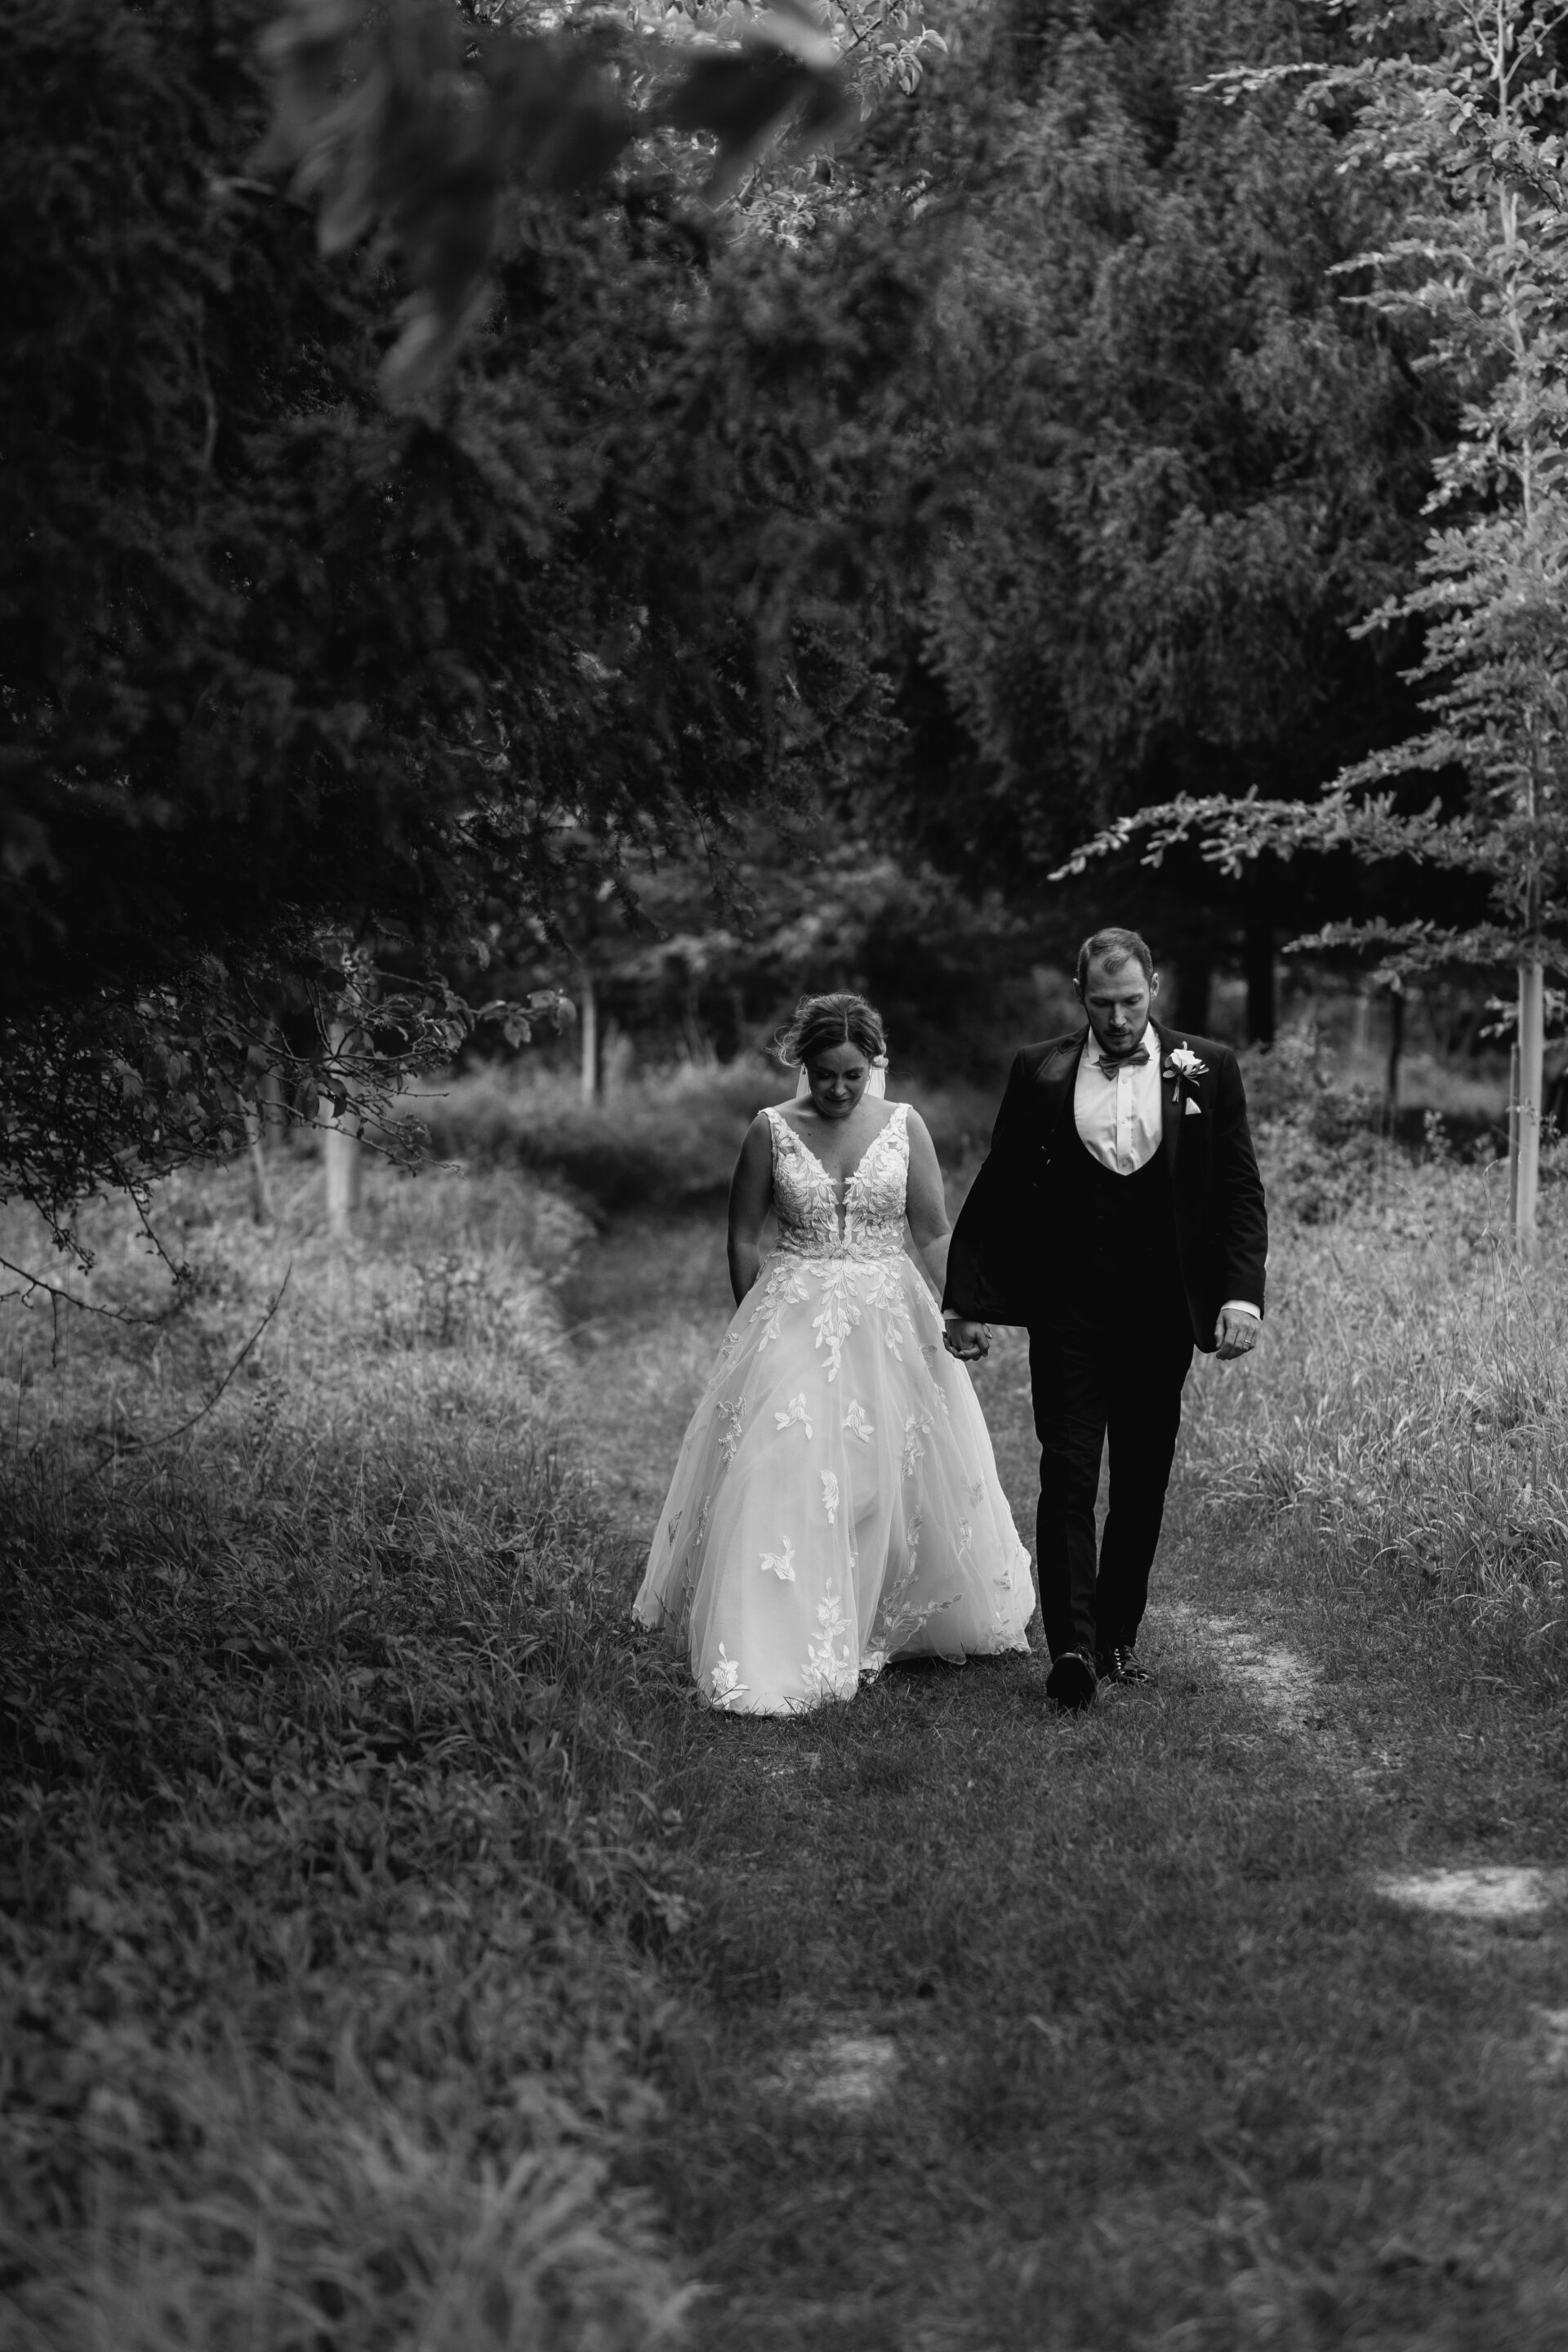 The bride and groom walk hand in hand during our couples portrait session at Old Luxters Barn in Oxfordshire